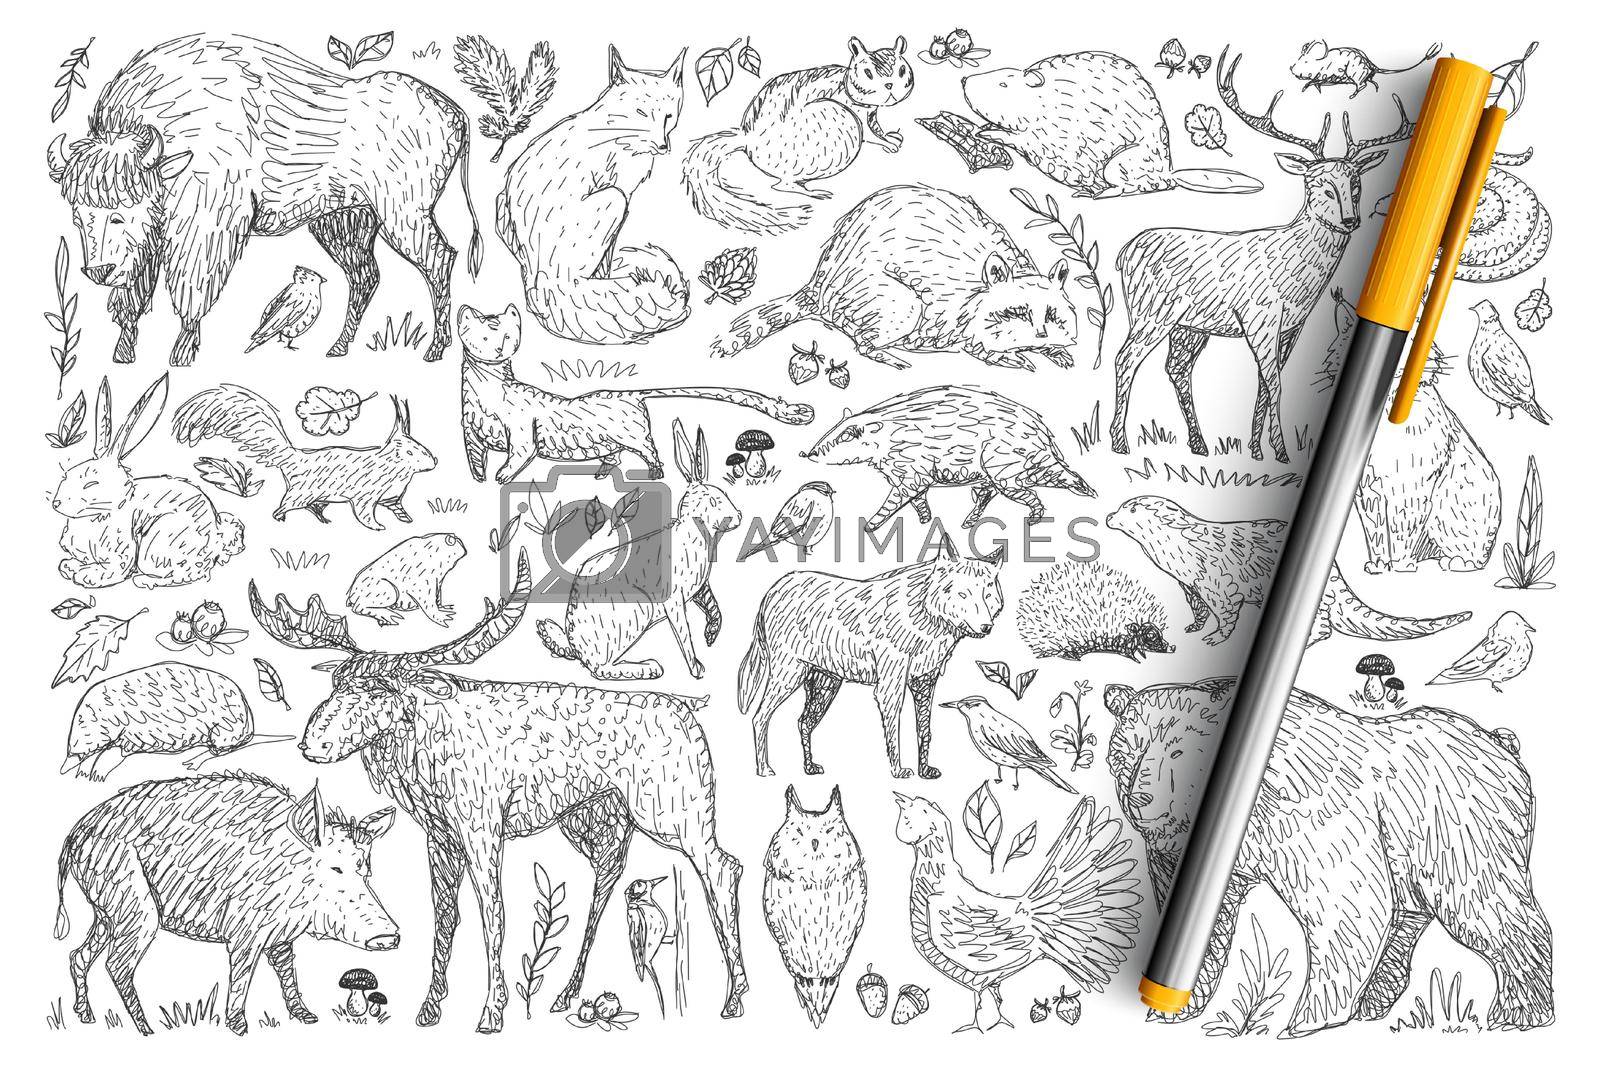 Forest wild animals doodle set. Collection of hand drawn deer fox bear rabbit squirrel raccoon buffalo hedgehog living in wild nature isolated on transparent background. Illustration of animals